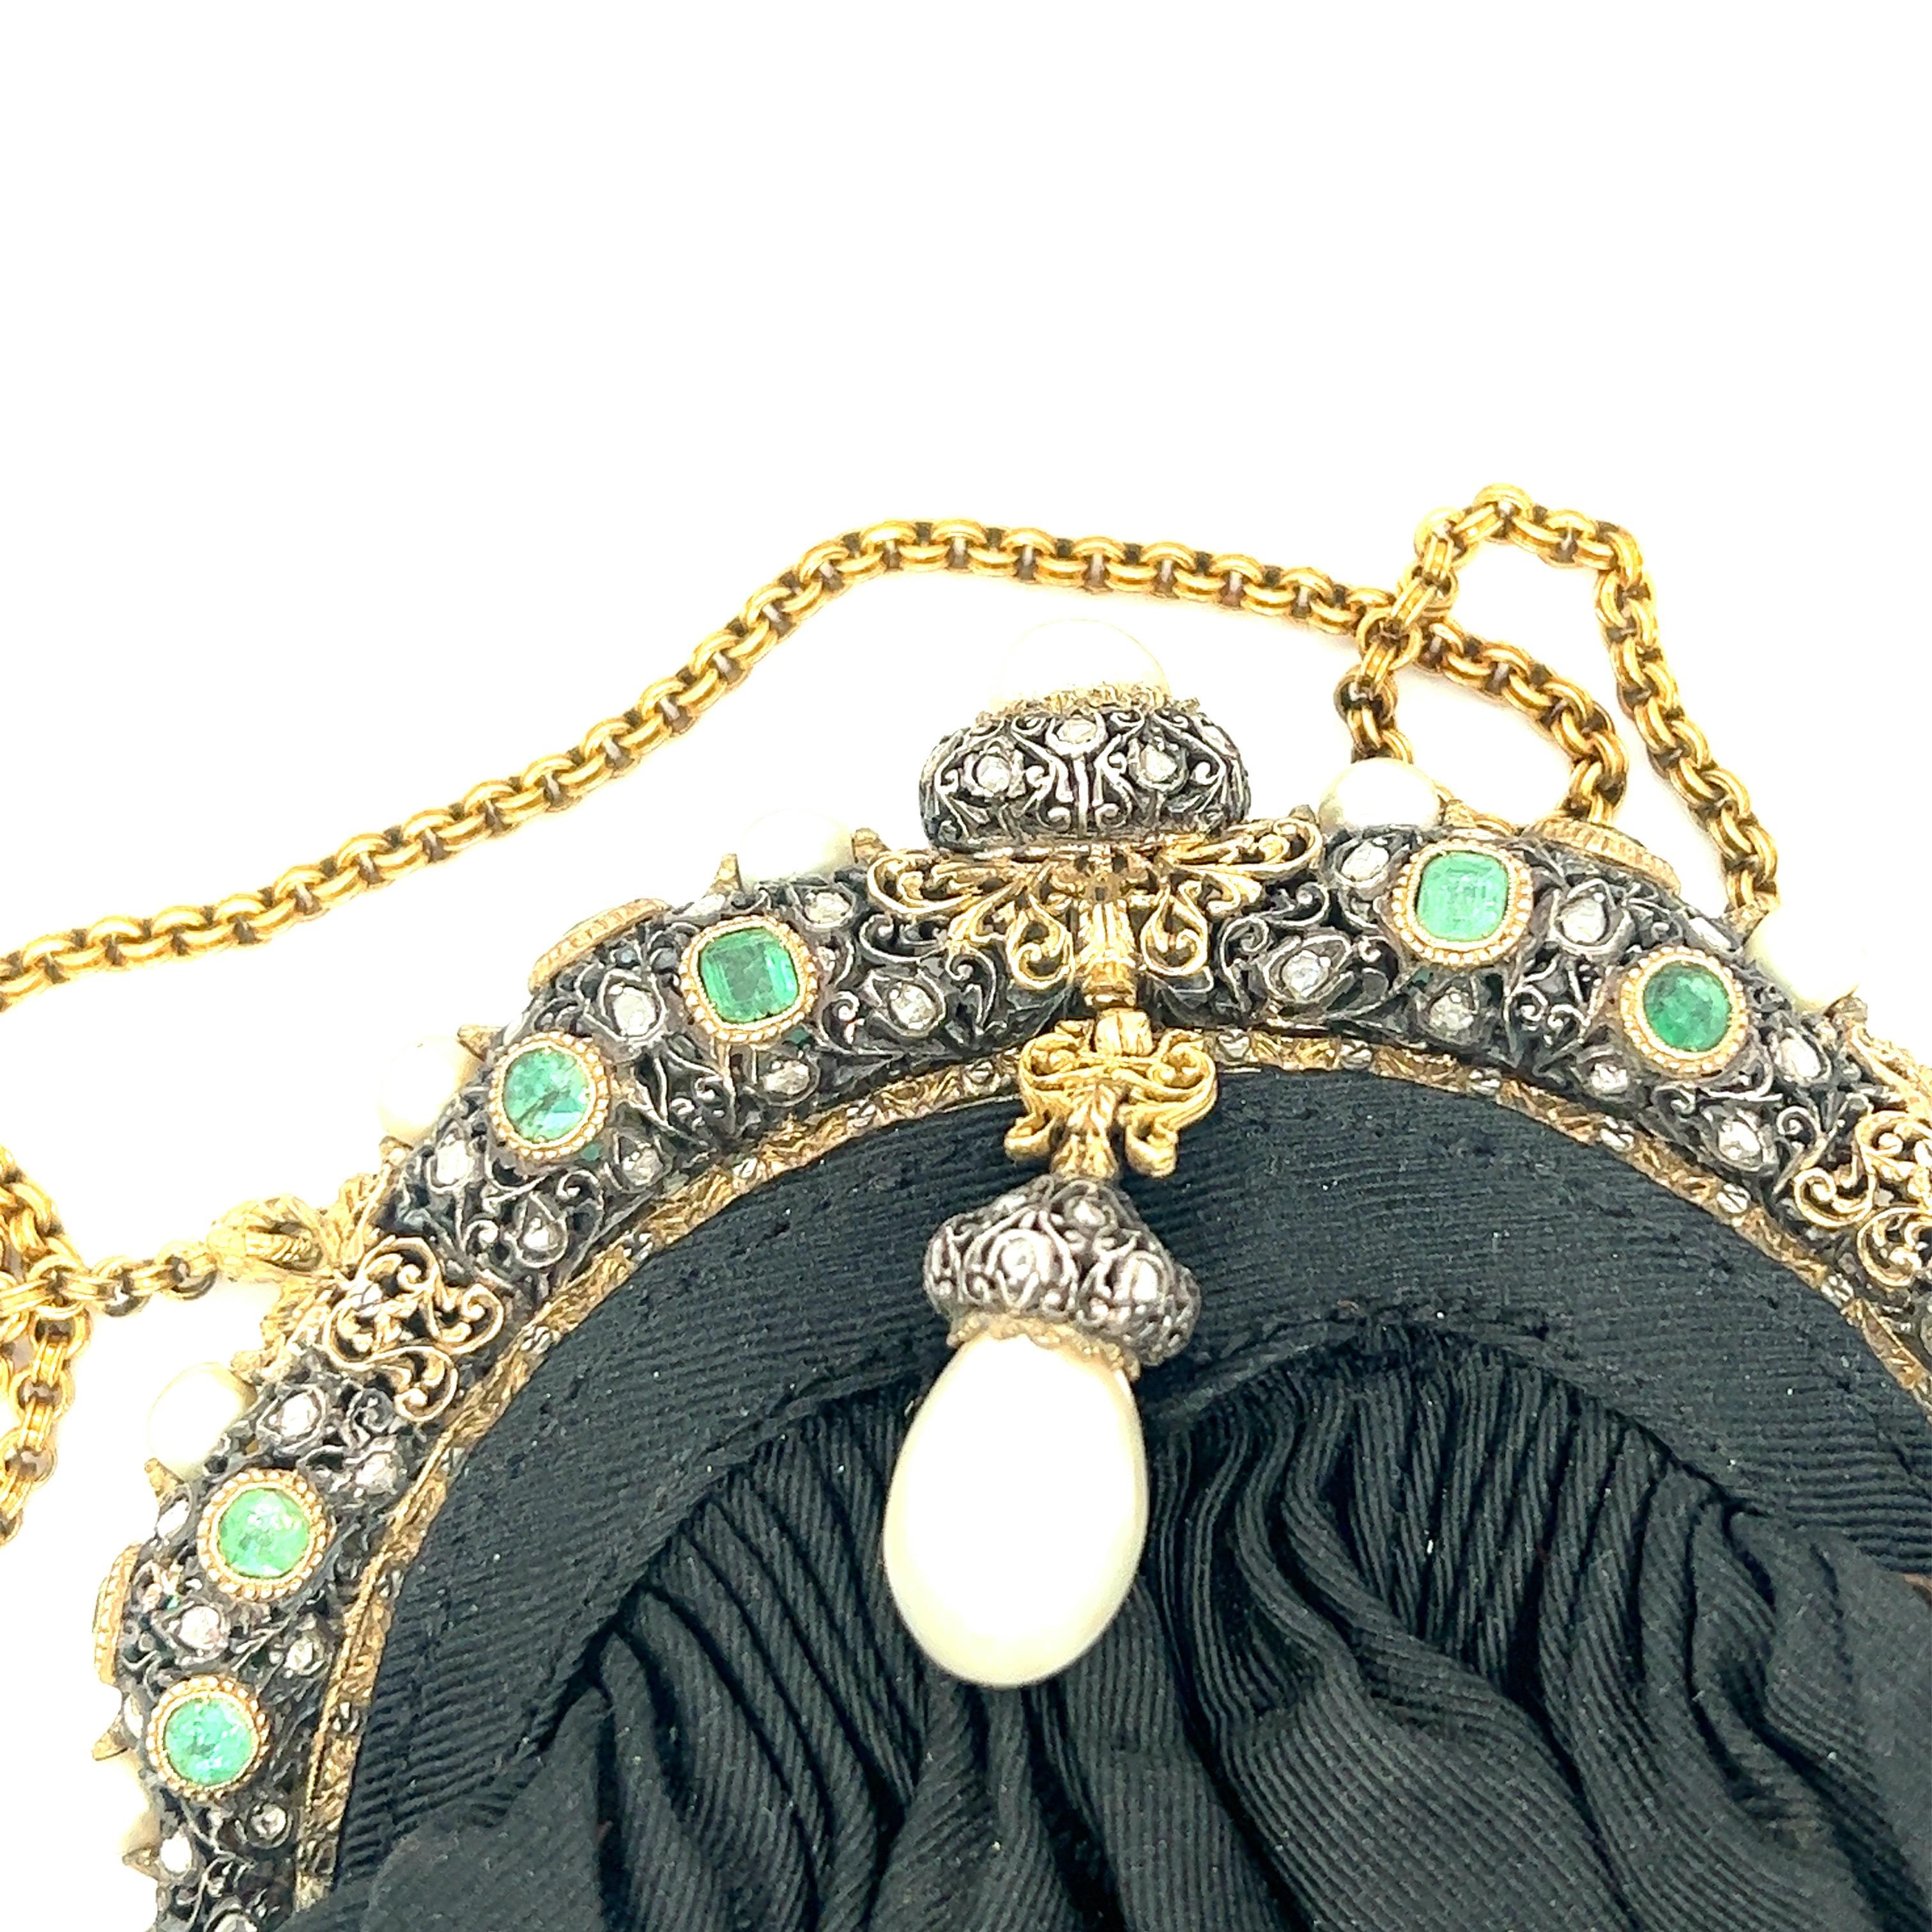 Mario Buccellati Frame Black Pouch Bag with Pearl

Rose-cut diamonds, various sizes of emeralds of approximately 2.5 carats, natural saltwater pearl (10 mm); set on yellow gold and silver

Size: width 4.5 inches, length 5.75 inches
Total weight: